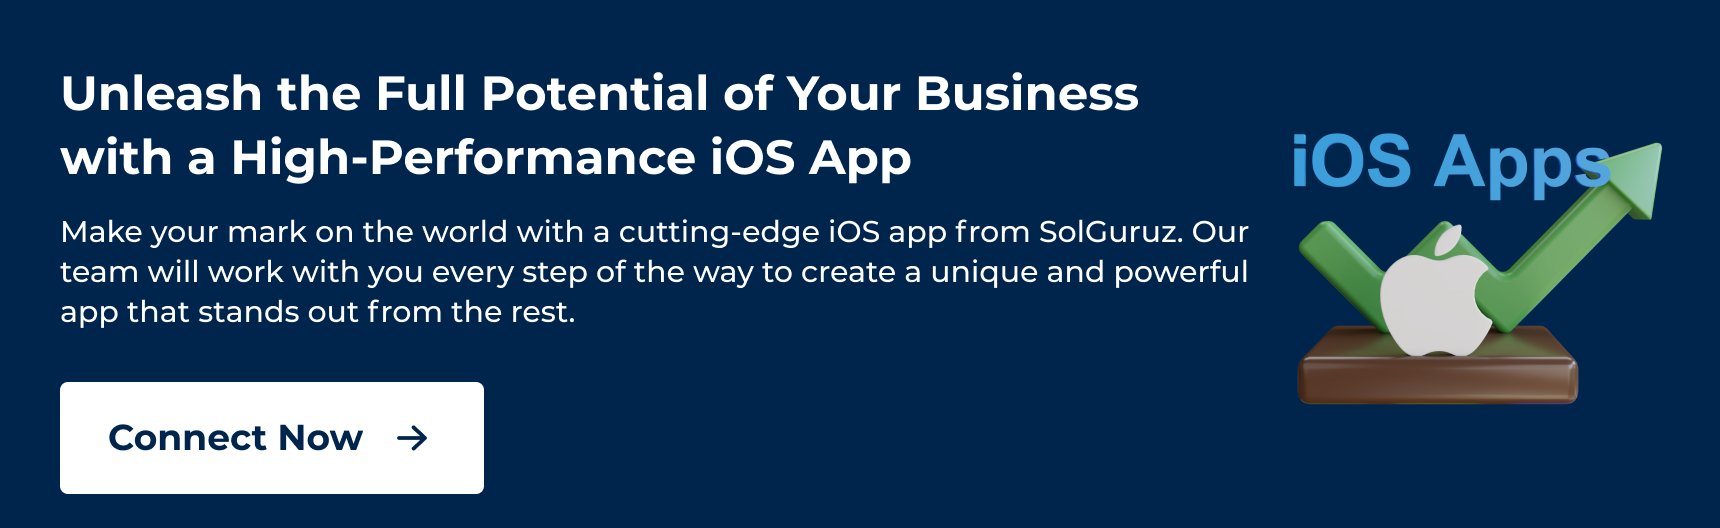 Unleash the Full Potential of Your Business with a High-Performance iOS App development